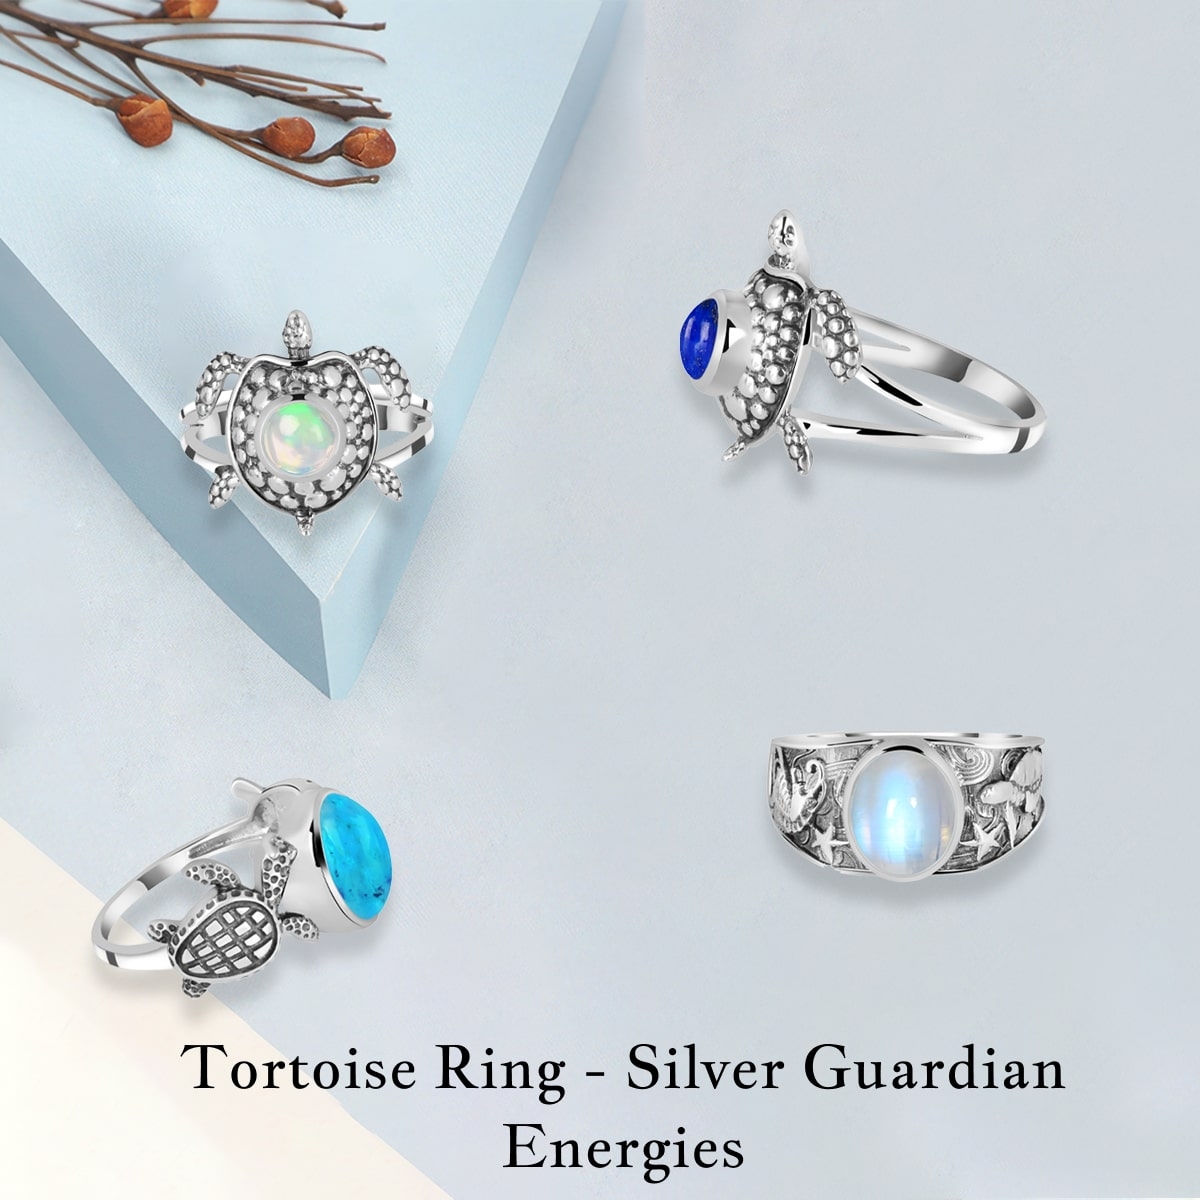 Tortoise Ring: Who should wear it? What are the benefits of wearing a  tortoise ring?